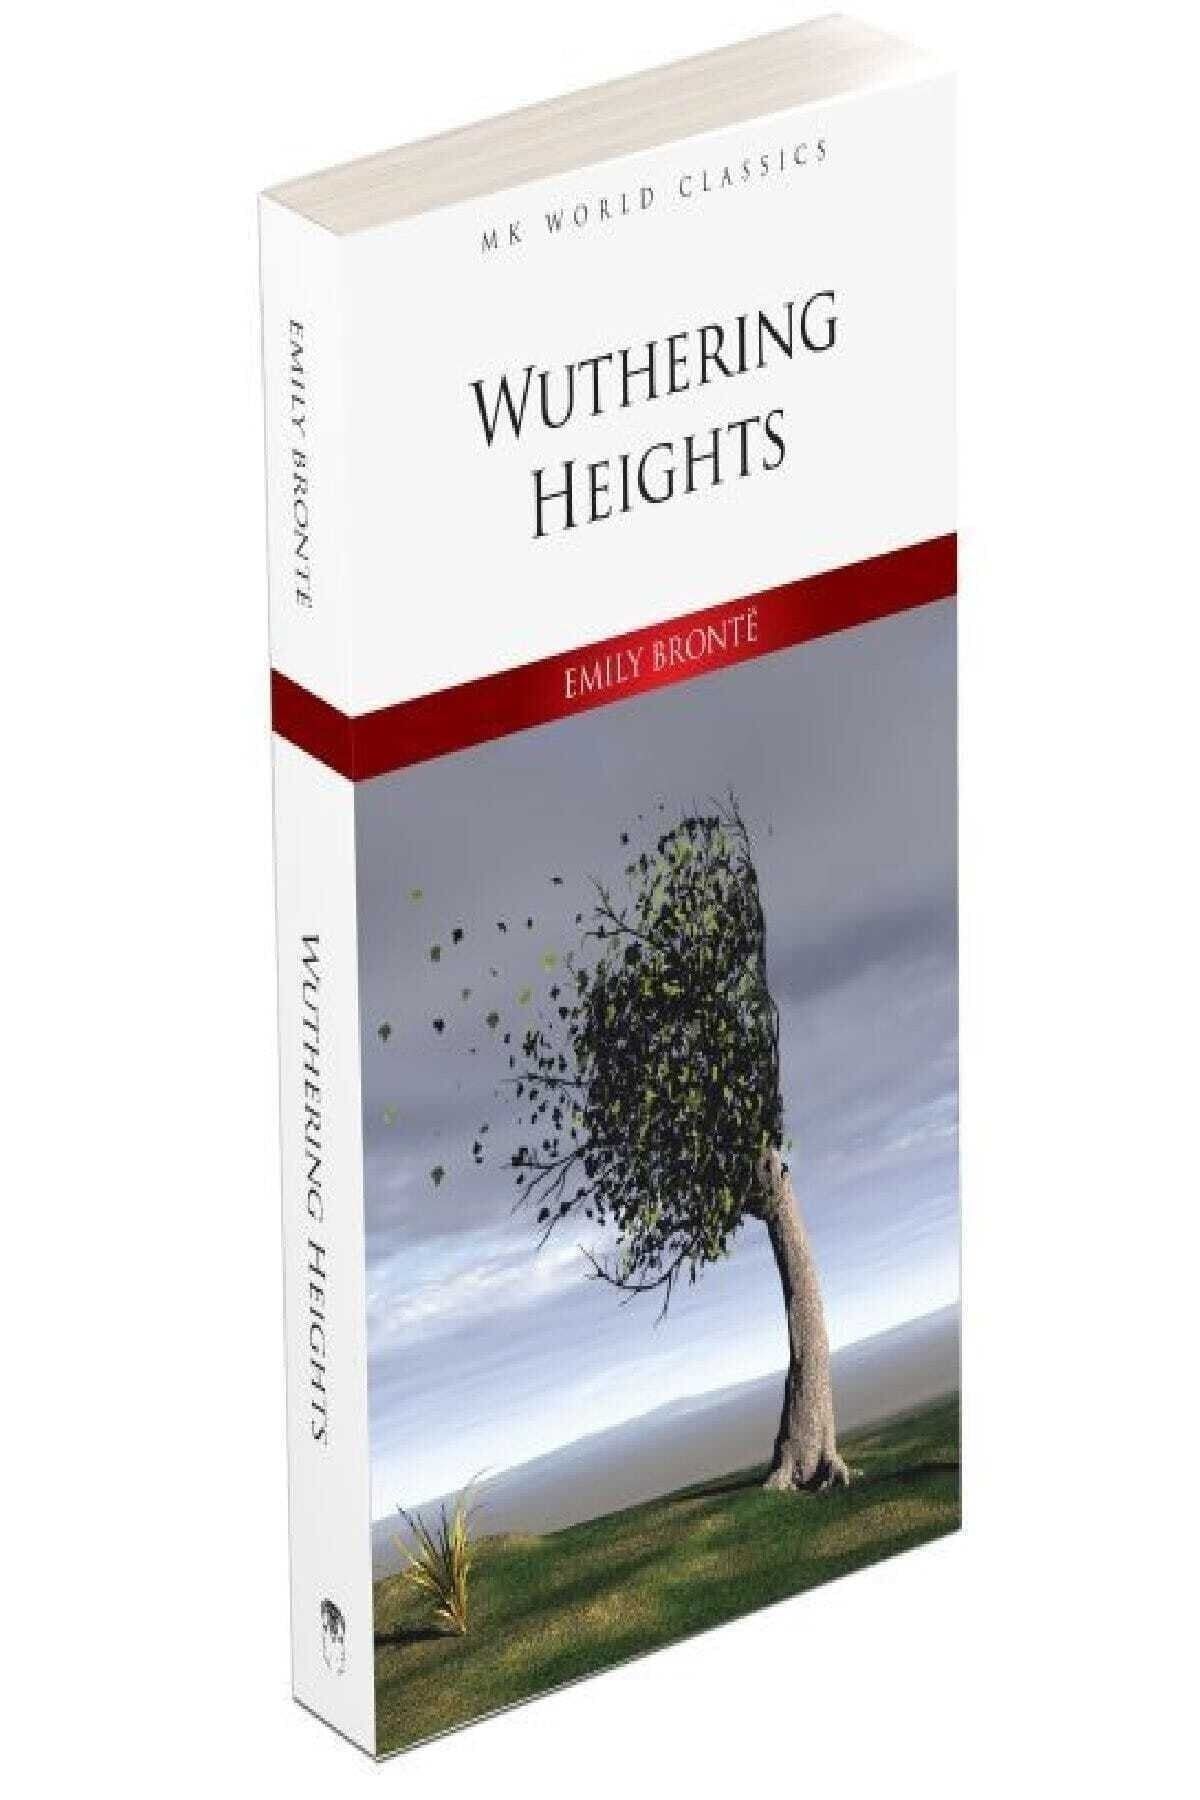 MK Publications - Roman Wuthering Heights - Emily Bronte